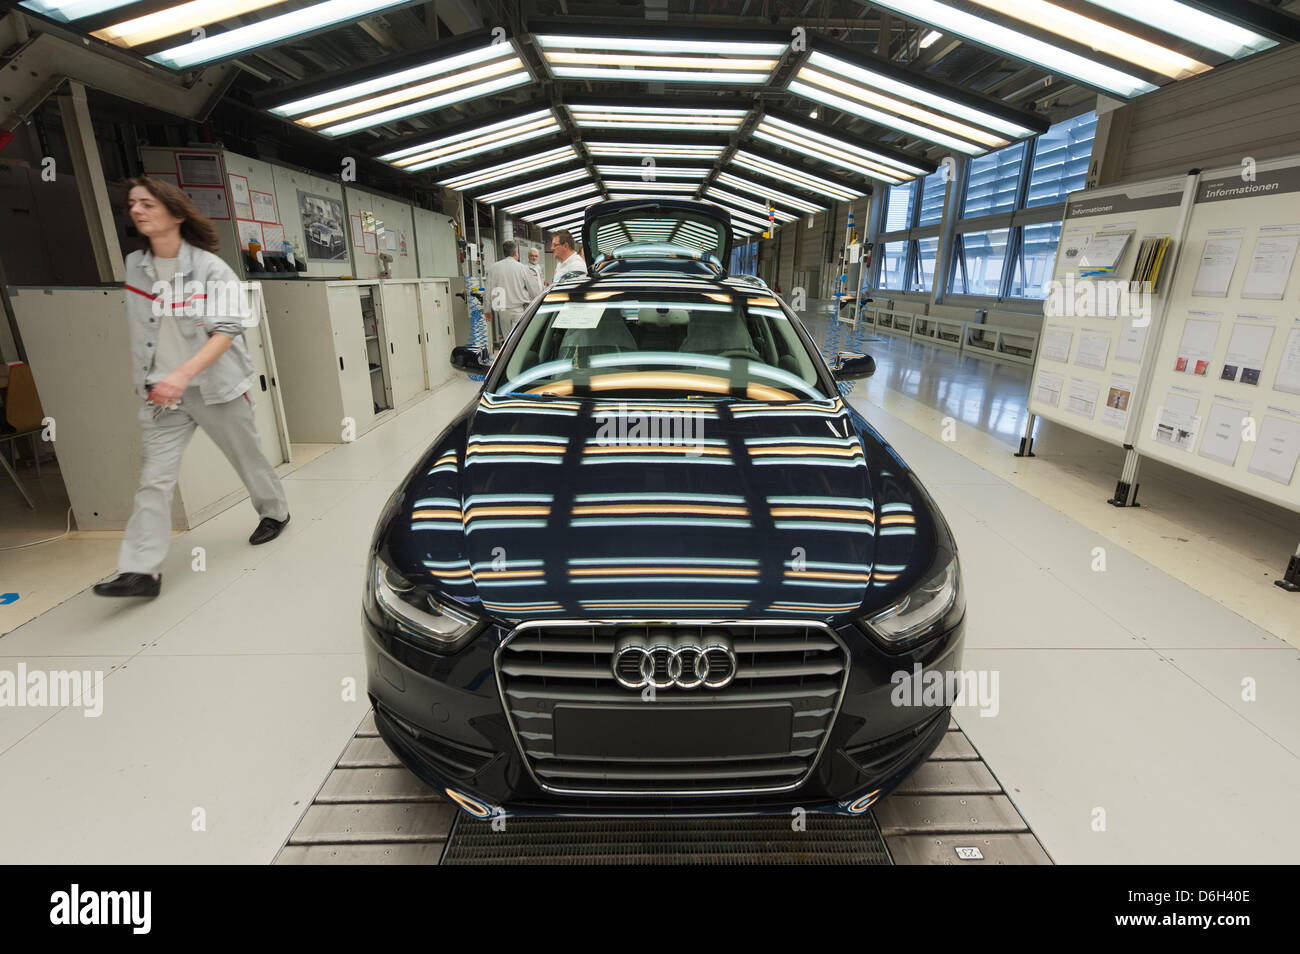 An Audi A4 Avant is pictured during its final inspection at the Audi plant in Ingolstadt, Germany, 29 February 2012. Audi will hold a press conference on their annual results on 01 March 2012. Photo: Armin Weigel Stock Photo